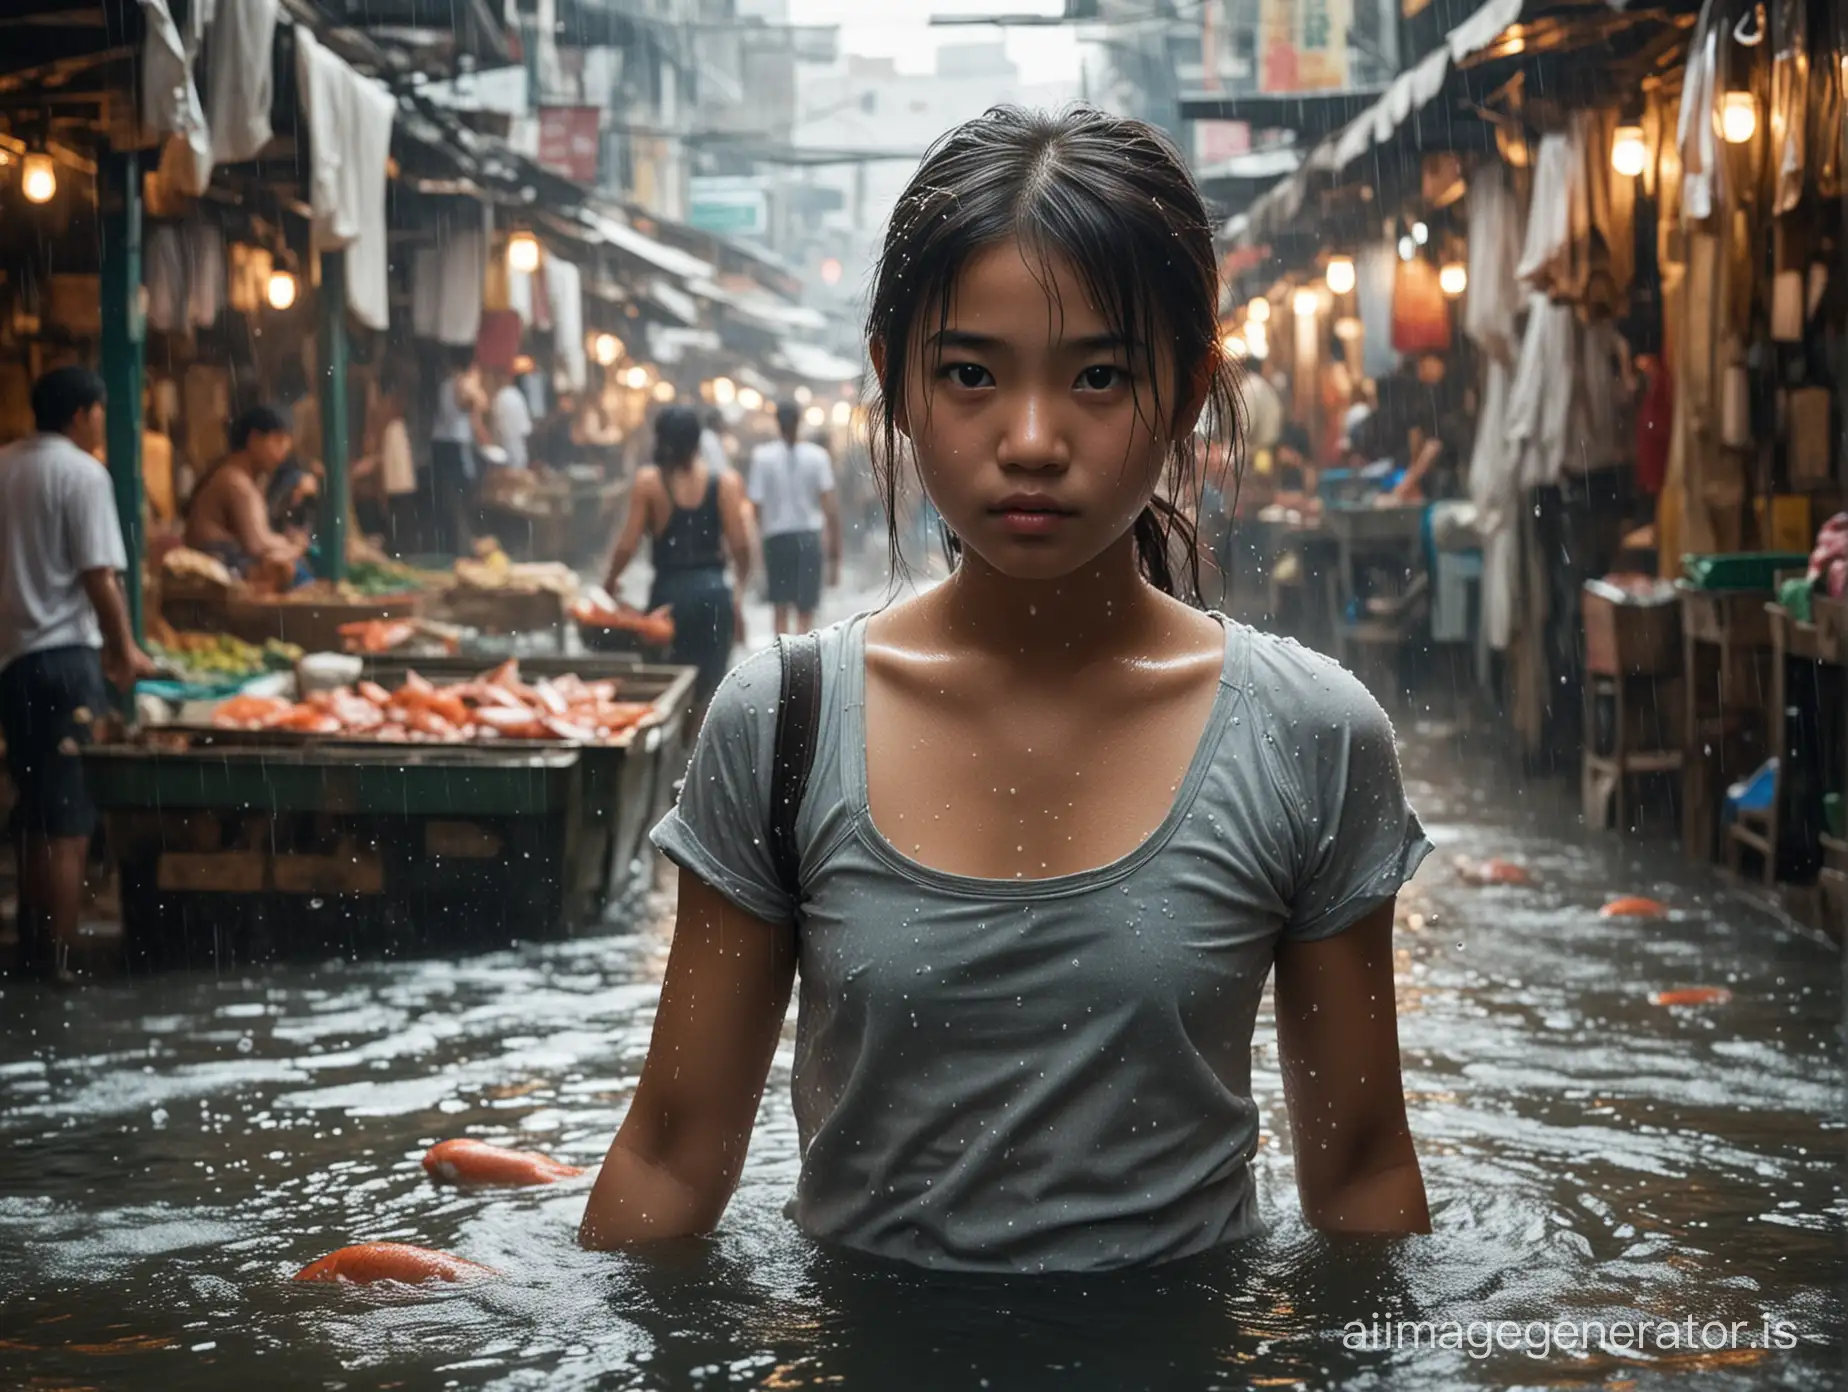 The 13 year old girl stood in the bustling Asian fish market, her bare chest glistening with sweat under the bright, white lights. The air around her was heavy with the pungent smell of fish and the chaotic sounds of bargaining and haggling. Despite the chaos, the girl stood confidently, her dark hair sticking to her flushed cheeks as she pulled a heavy box of fish through the crowded aisles. The icy water dripped down her arms and legs, mixing with the sweat and leaving trails of shimmering droplets in its wake. She was determined and focused, her young but strong arms straining with the weight of the box. In that moment, she embodied the energy and resilience of the market, her determination shining through the beads of sweat on her skin. She was a stark contrast to the hustle and bustle around her, a young girl amidst the chaos, working hard and holding her own in a traditionally male-dominated environment. It was a vibrant and powerful image, one that captured the essence of the fish market and the strength of a young girl.